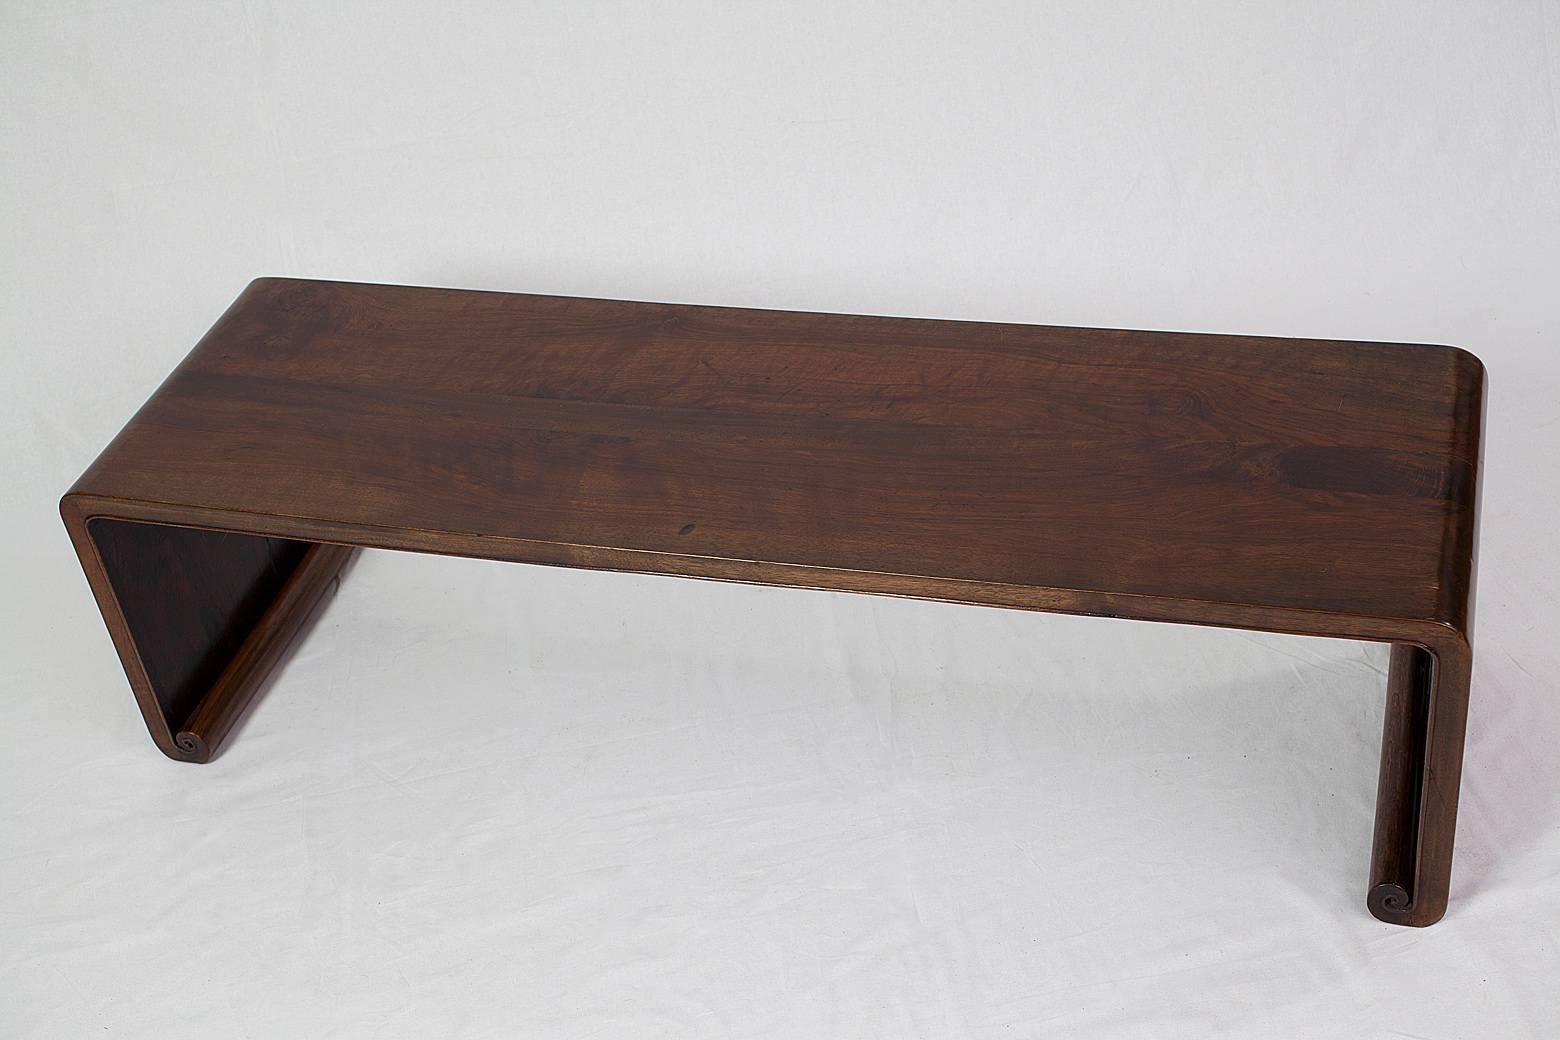 This stunning 19th century kang table made from walnut wood combines elegance and simplicity with exclusive material. Characteristic of Shanxi furniture, pieces of this quality are a rare find nowadays. 

This piece is made entirely from walnut